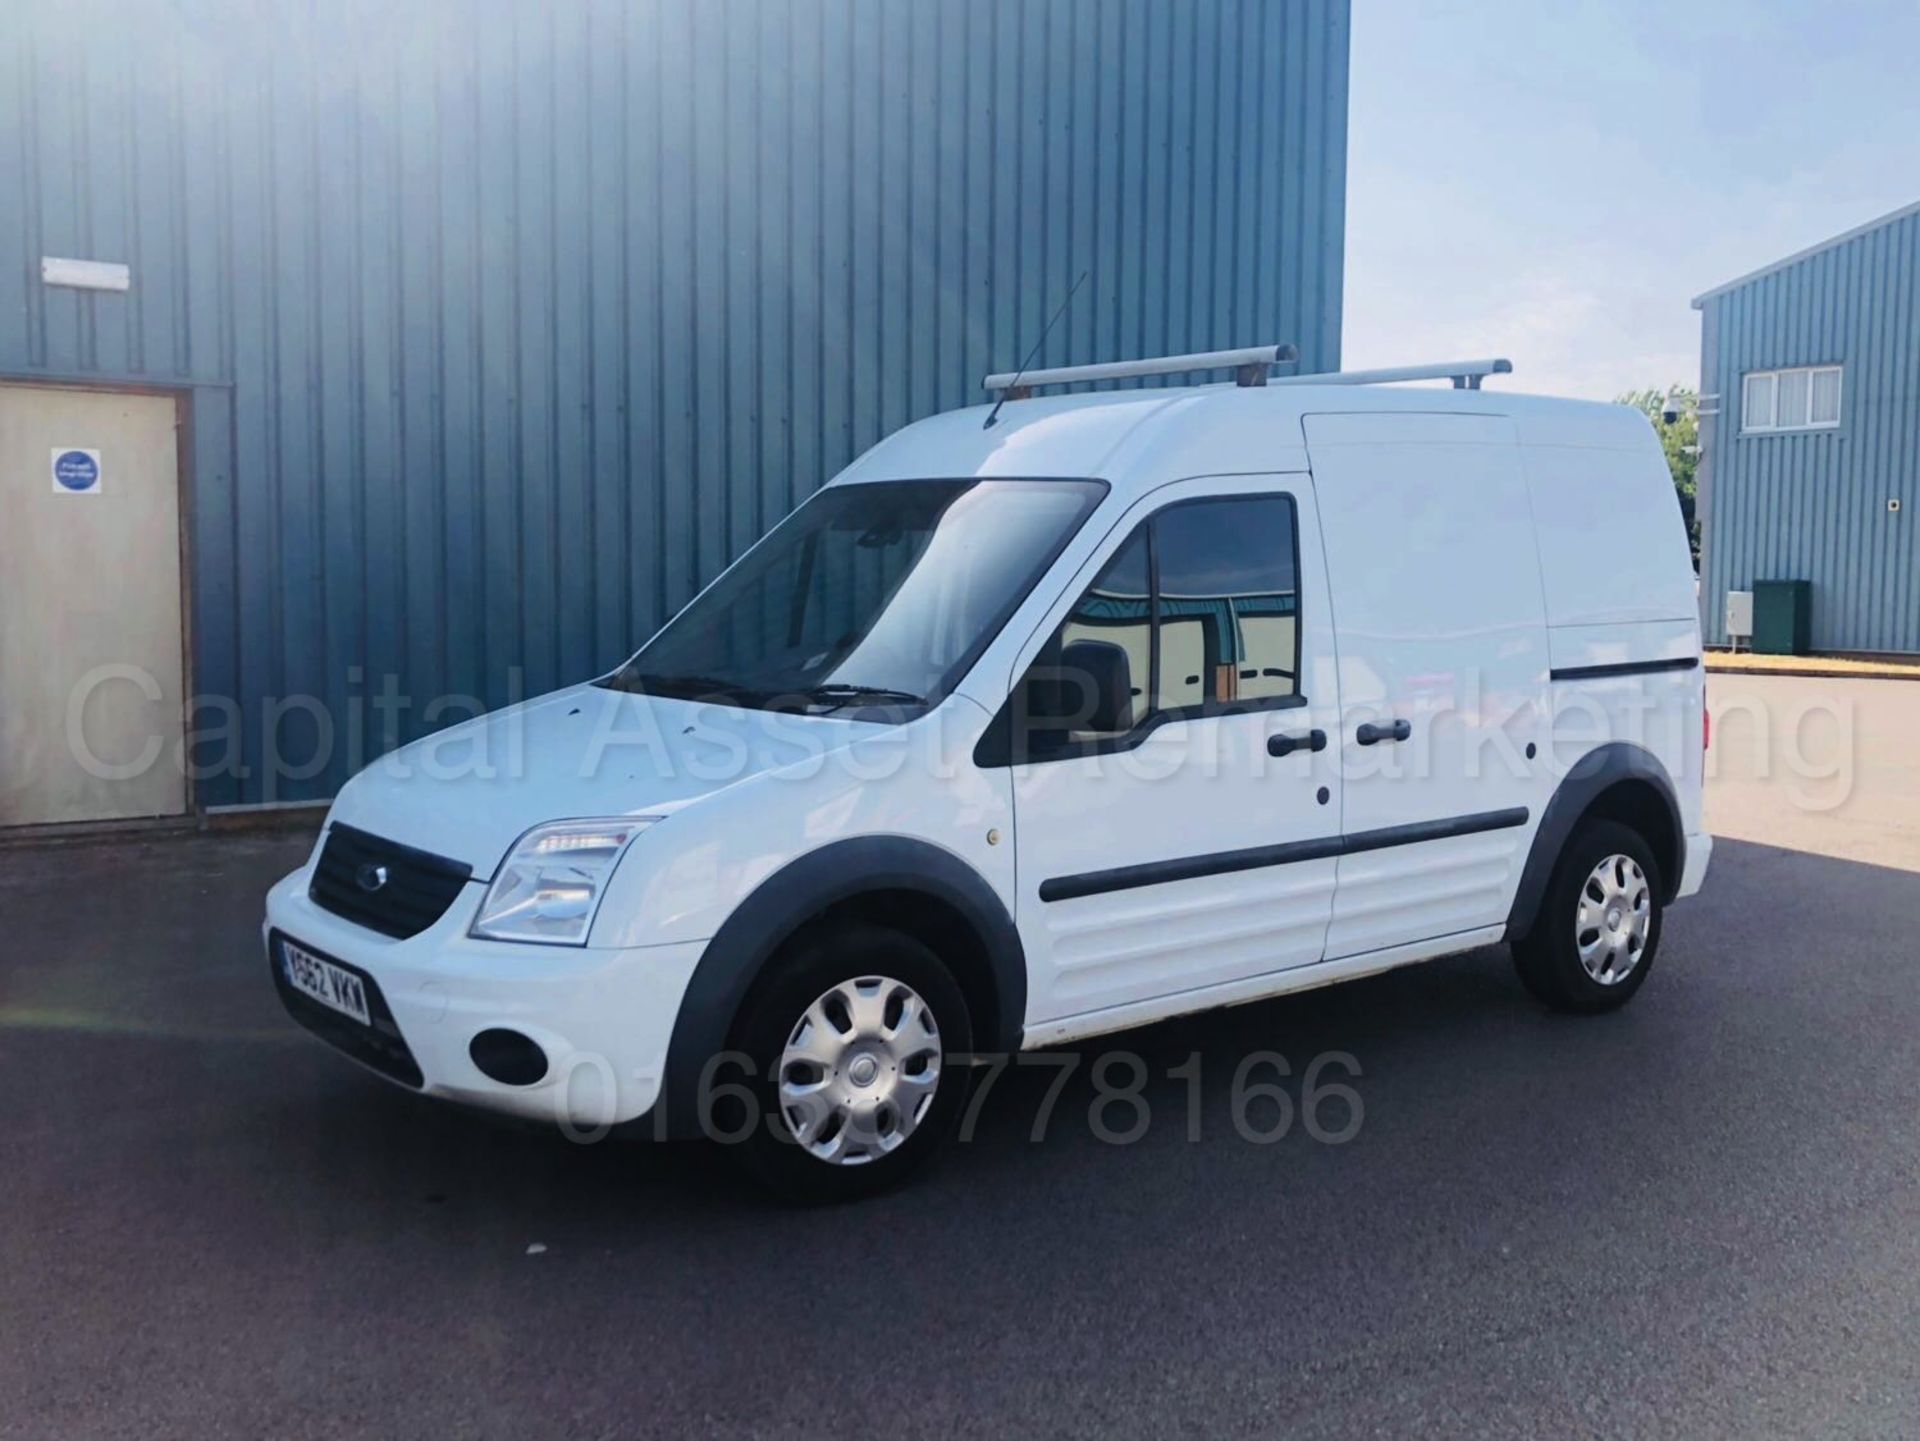 FORD TRANSIT CONNECT *TREND EDITION* 'LWB HI-ROOF' (2013) '1.8 TDCI - 90 BHP - 5 SPEED' *LOW MILES*